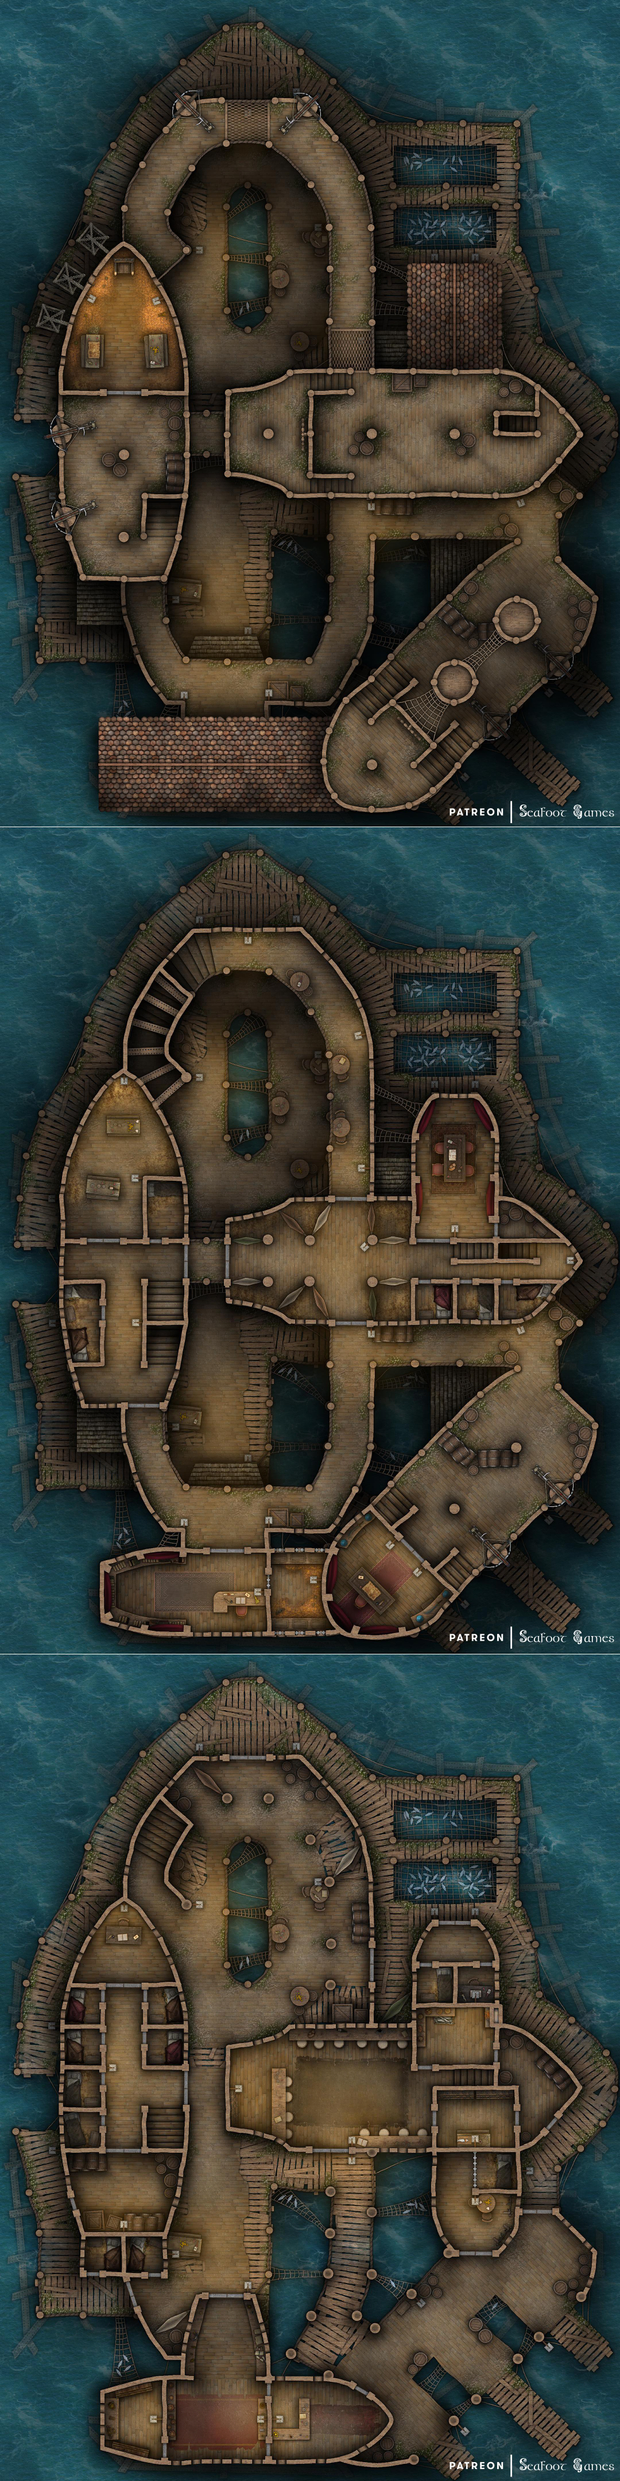 Pirate's Floating Shipwreck Fortress Free 40x30 Multi-Level Battlemap & Adventure